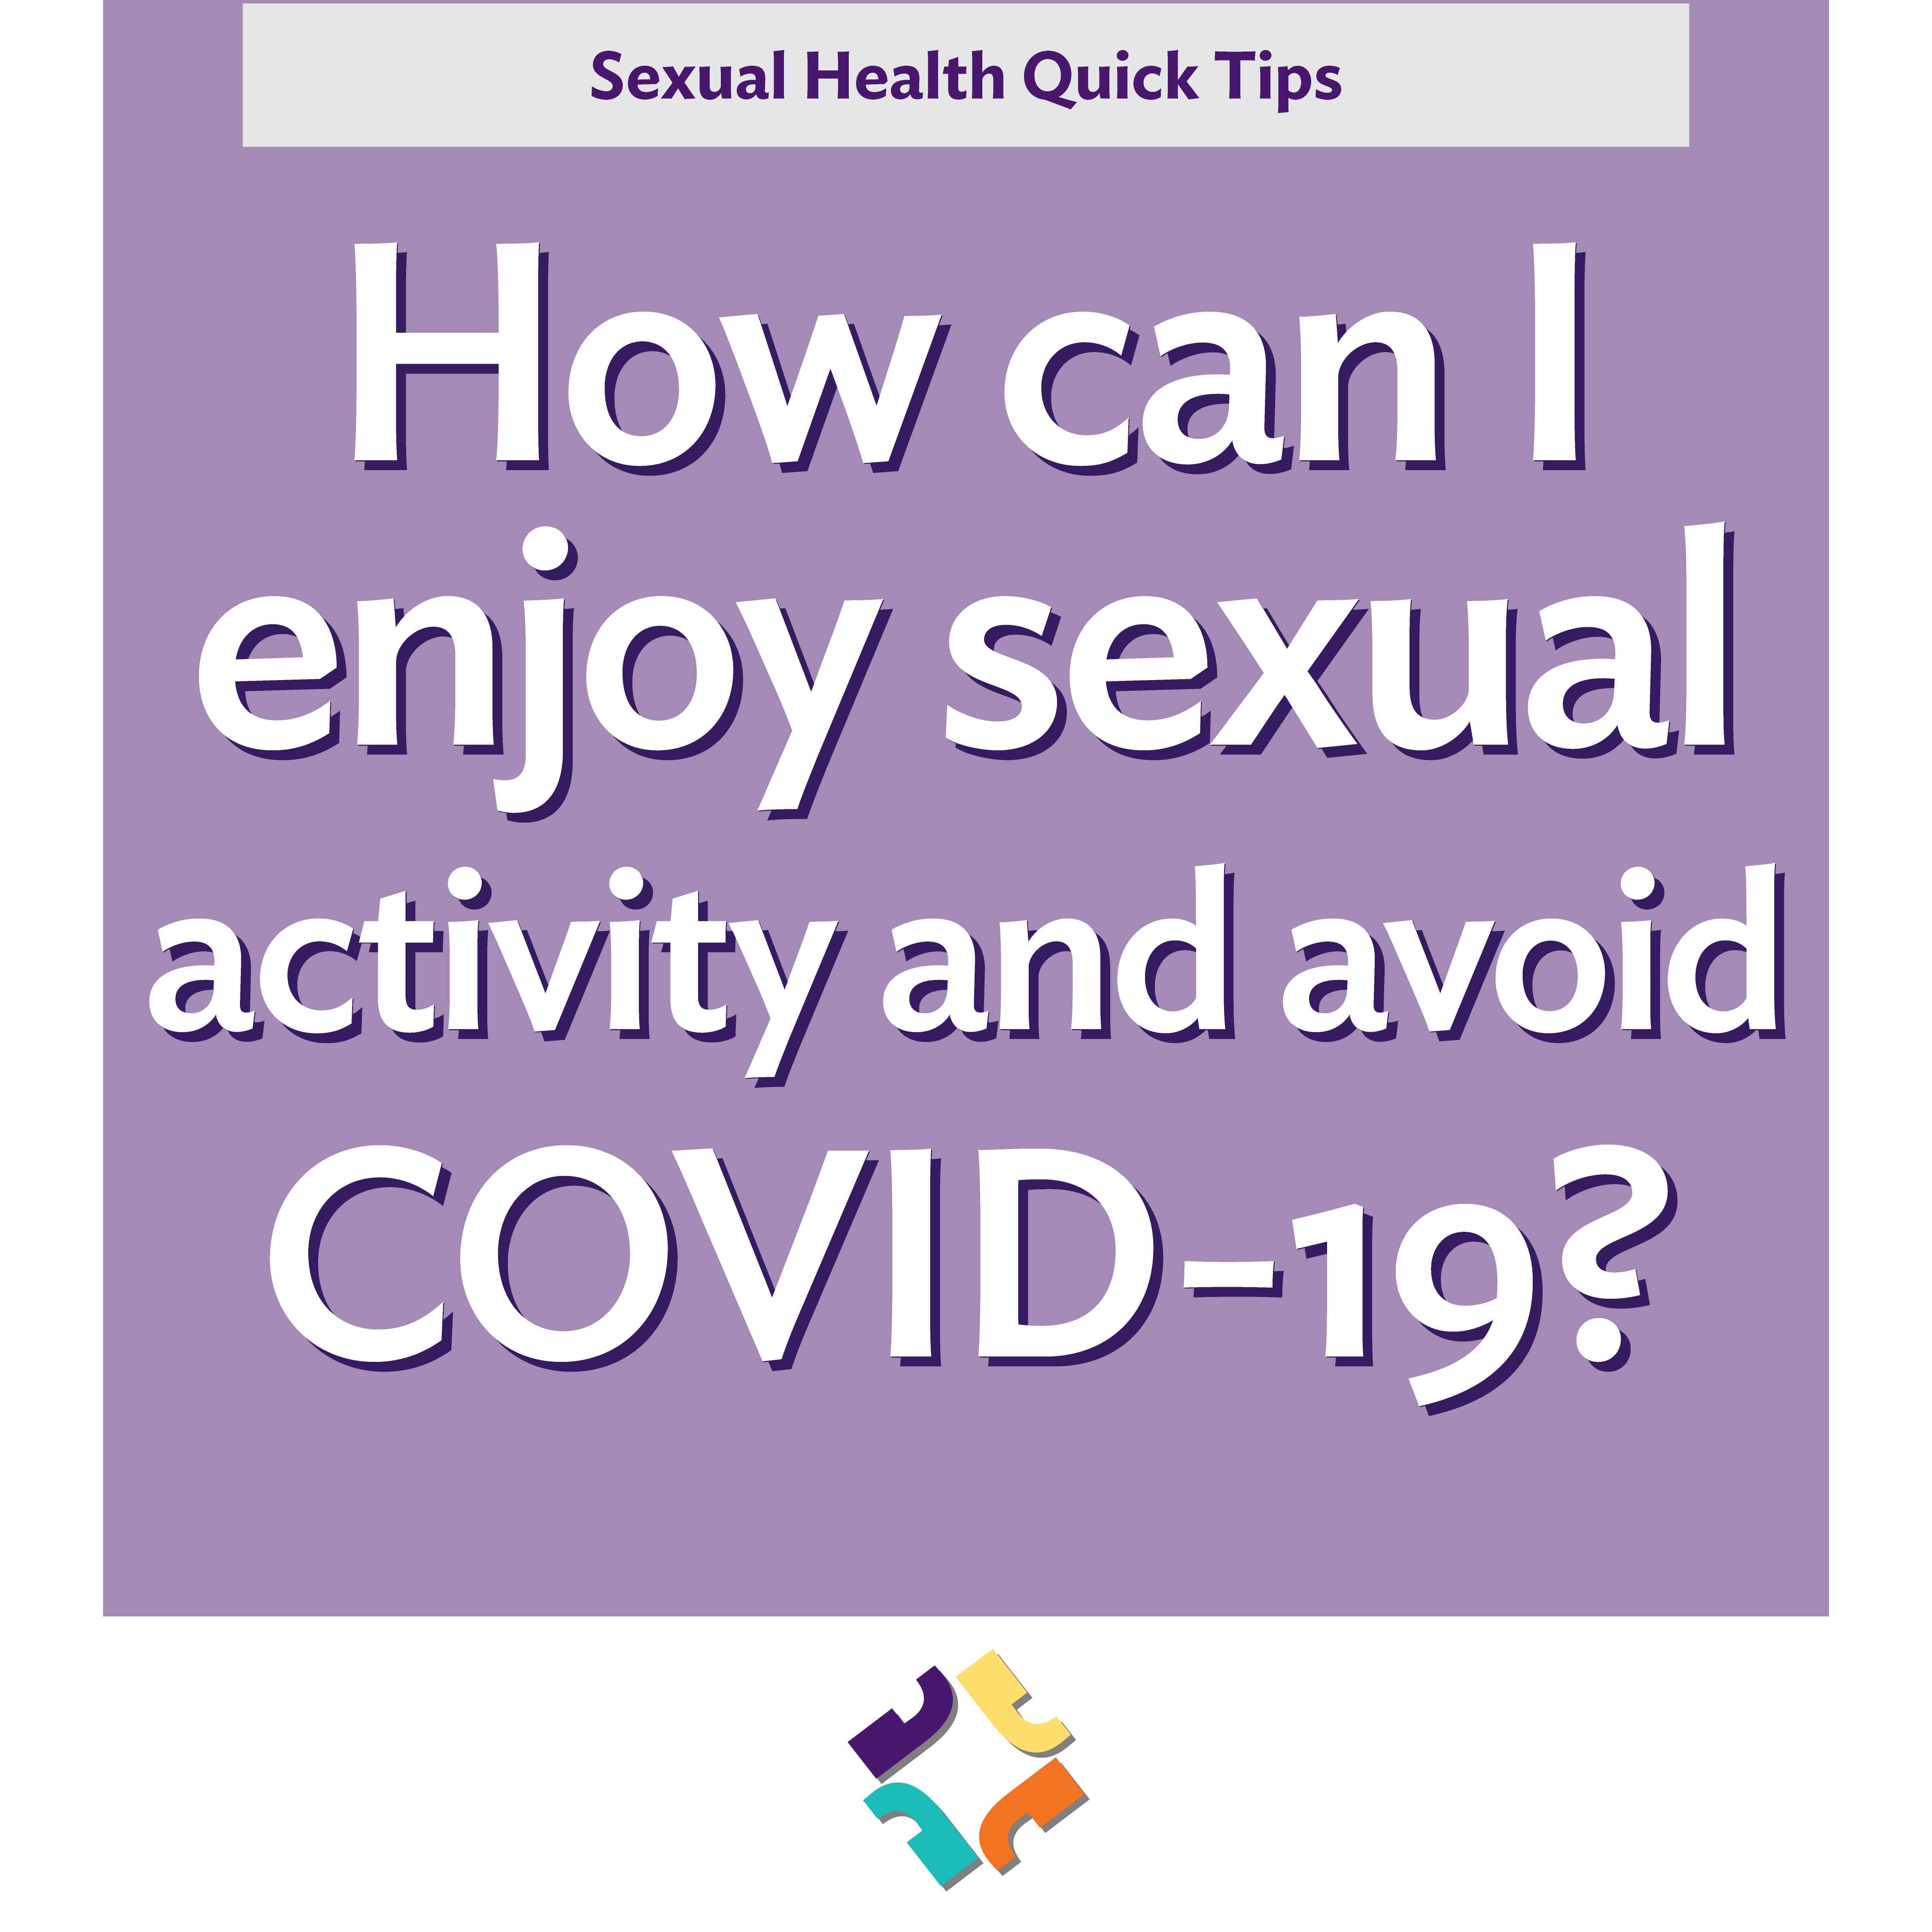 How can I enjoy sexual activity and avoid COVID-19?